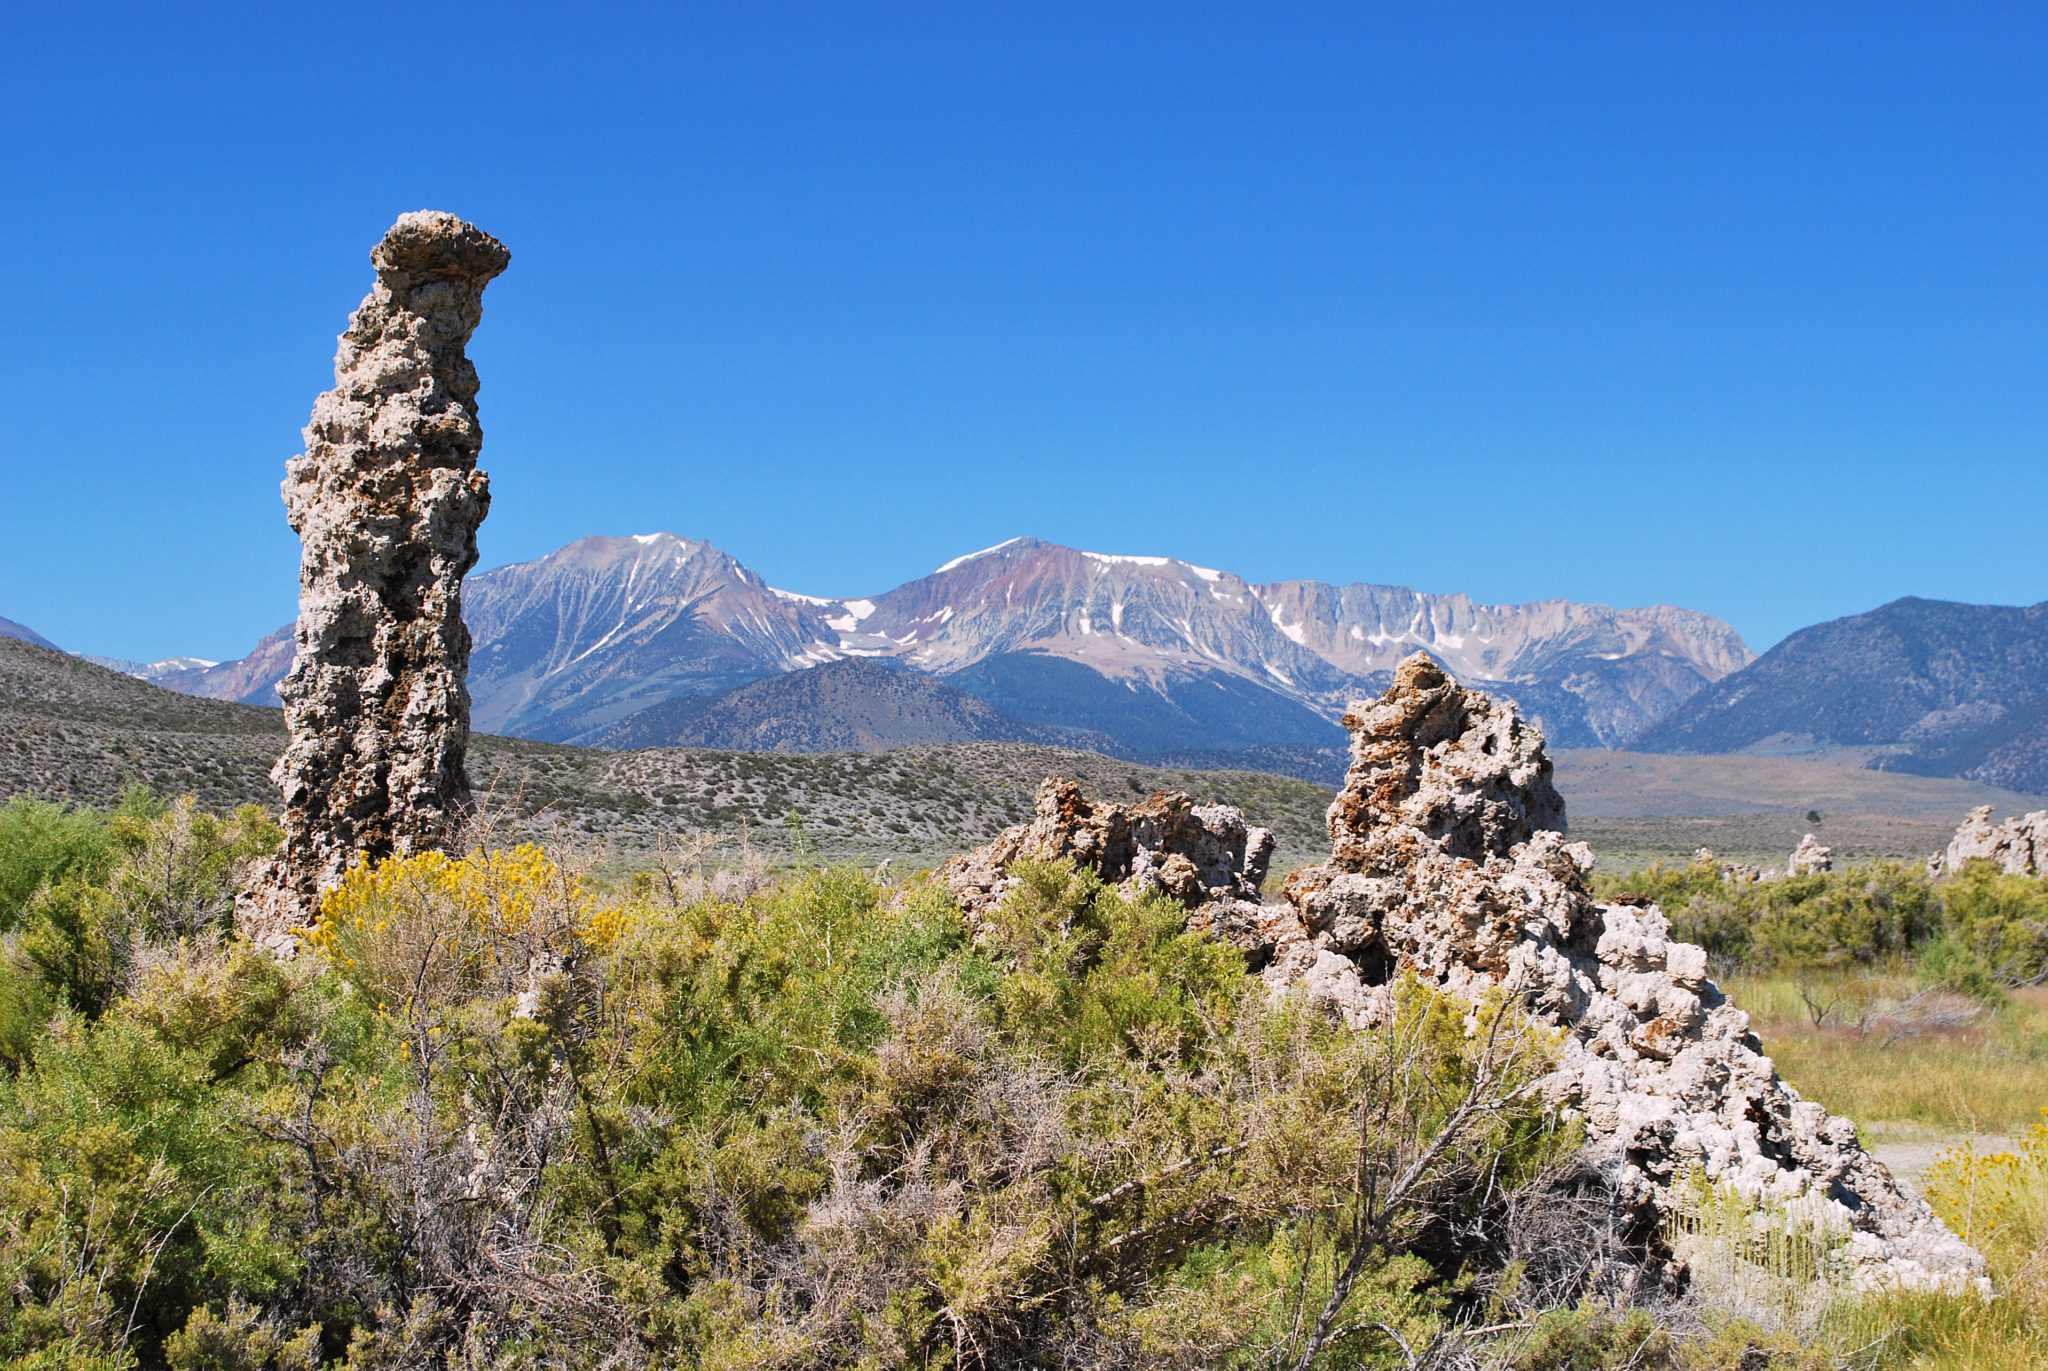 Tufa towers and the Sierra Mountains